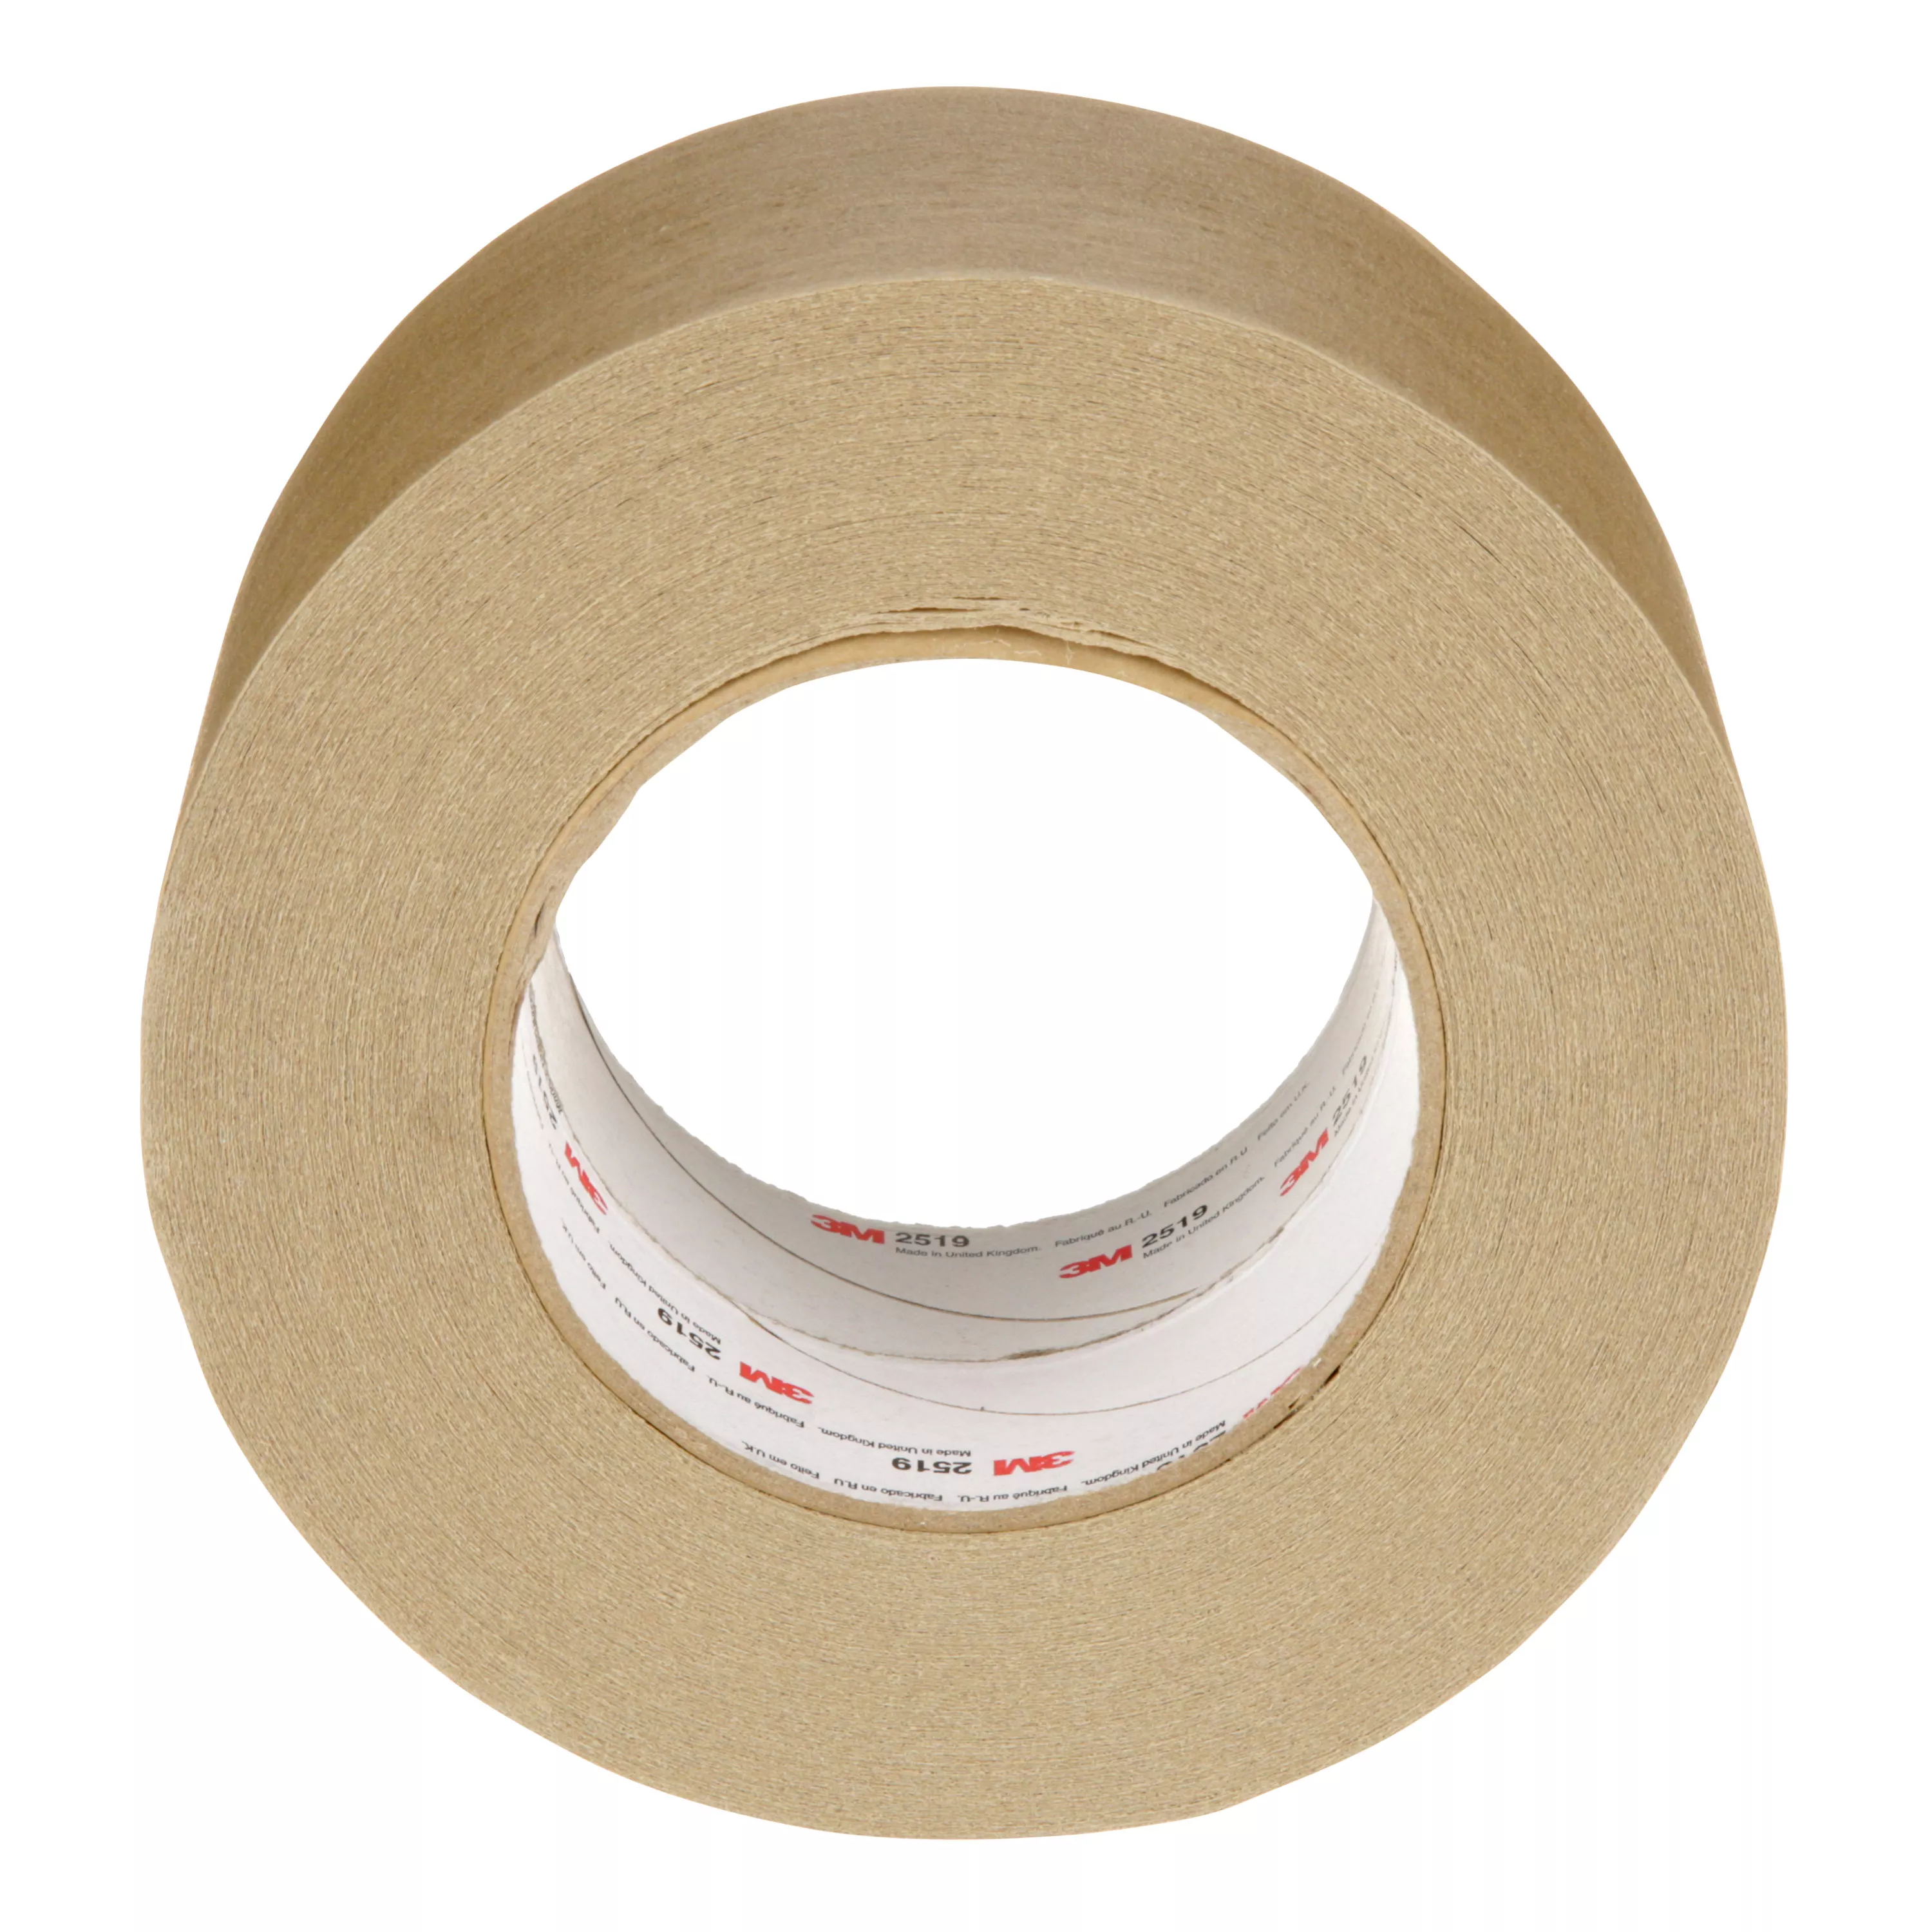 Product Number 2519 | 3M™ High Performance Flatback Tape 2519